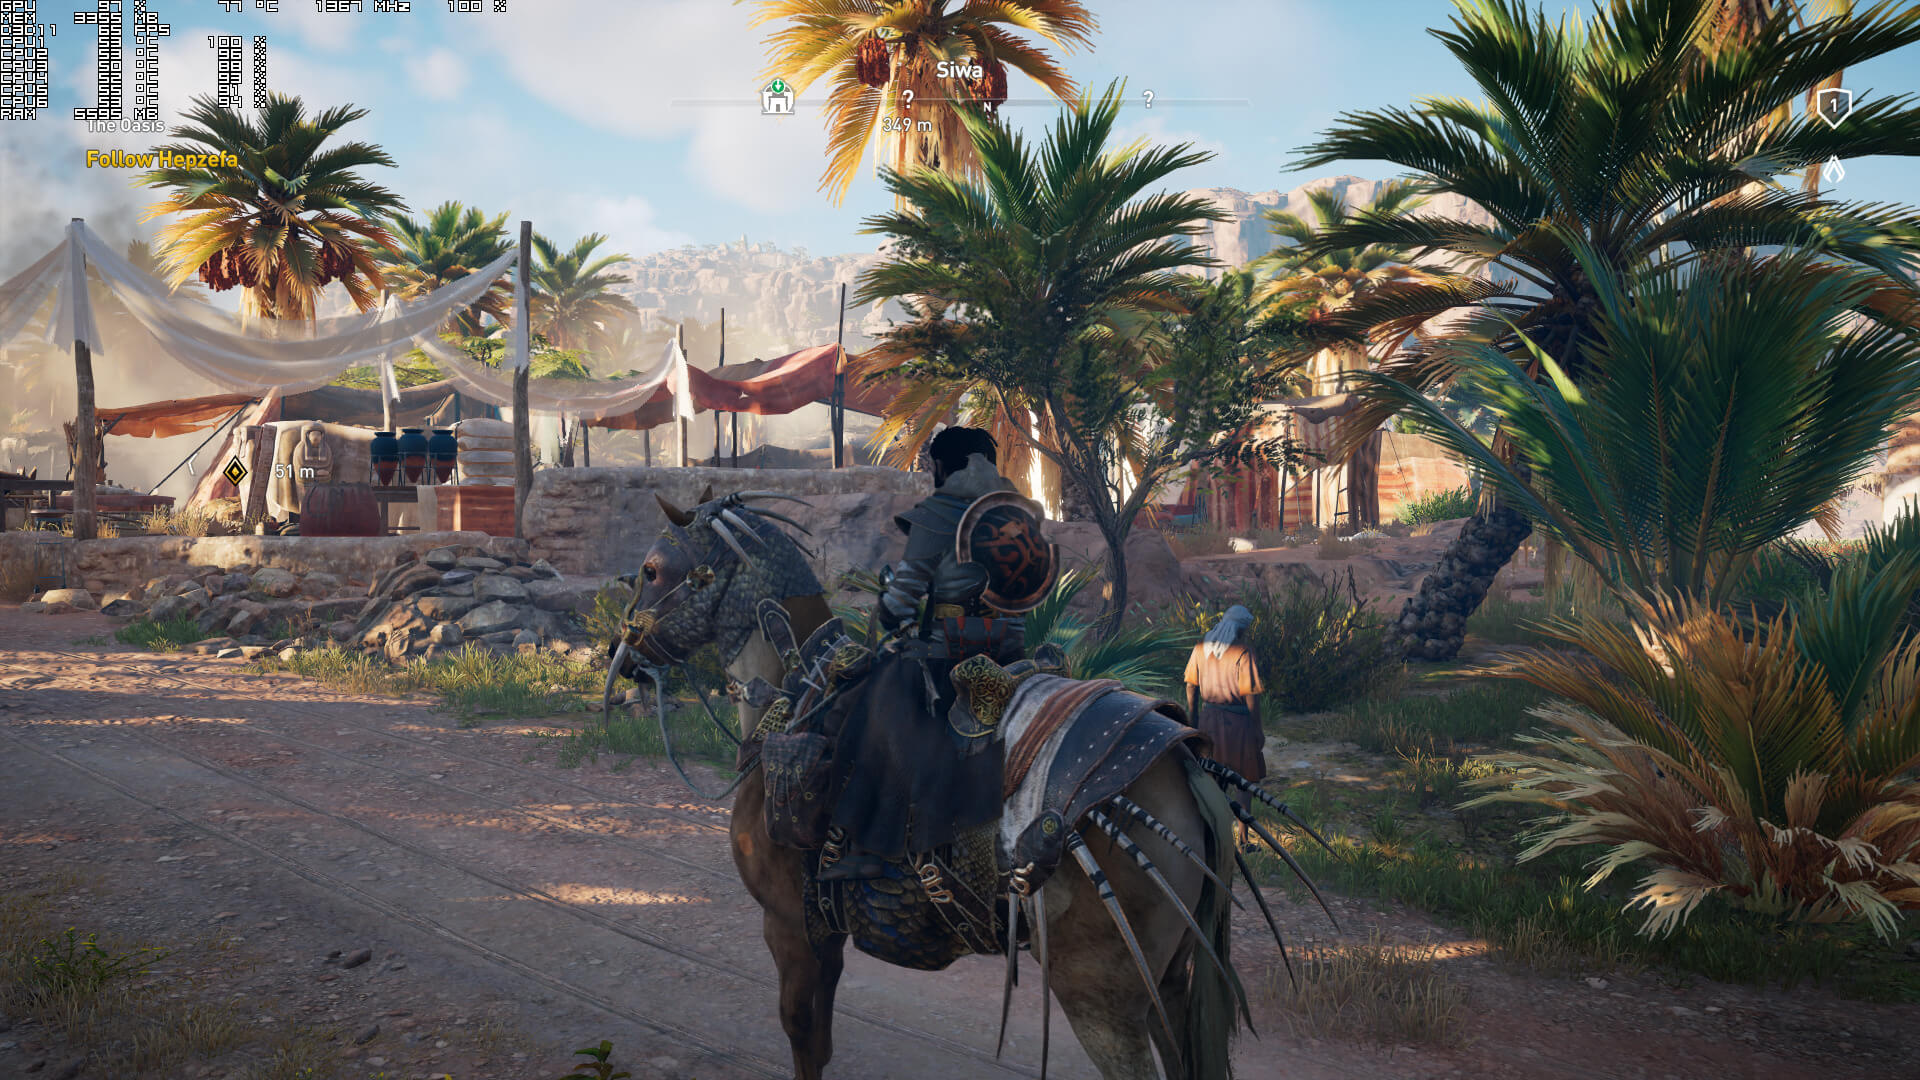 Graphics wise, Assassin’s Creed Origins looks absolutely stunning. 